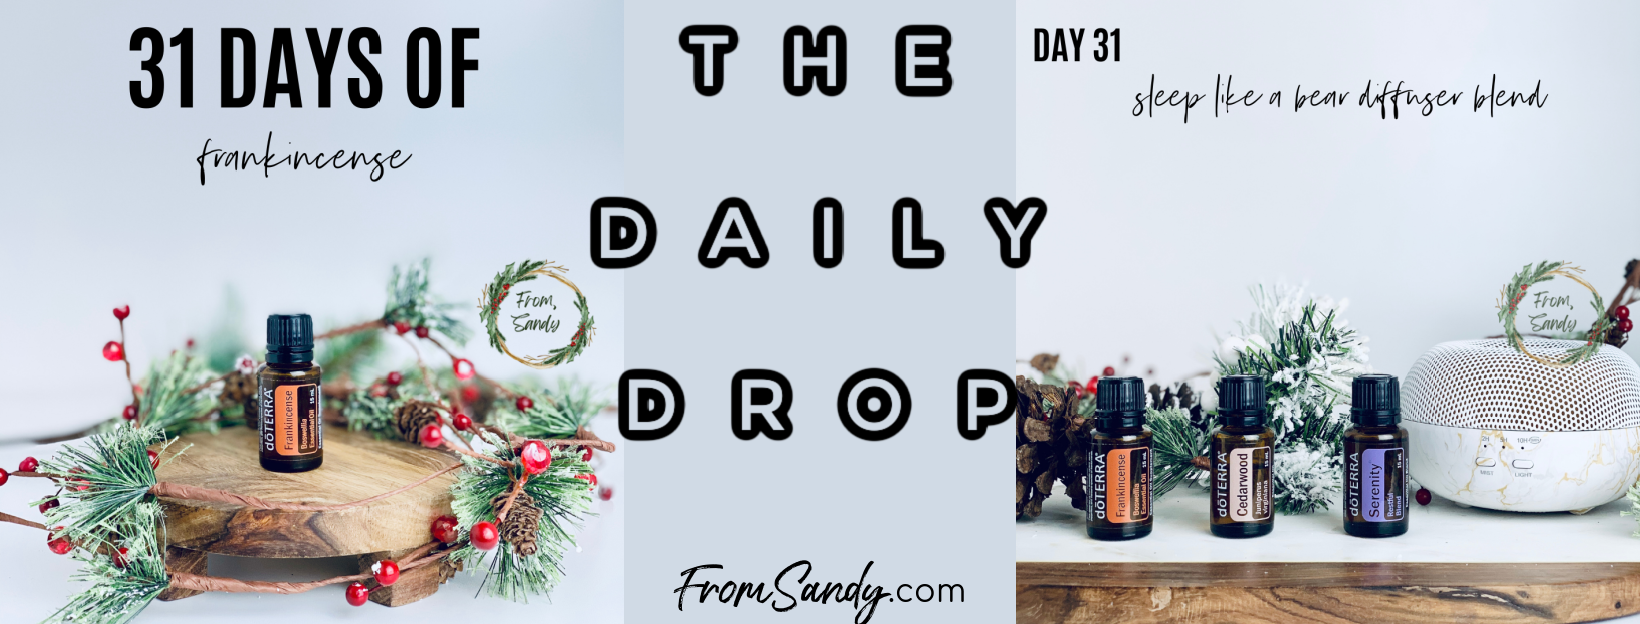 Sleep Like a Bear Diffuser Blend (31 Days of Frankincense: Day 31), From Sandy